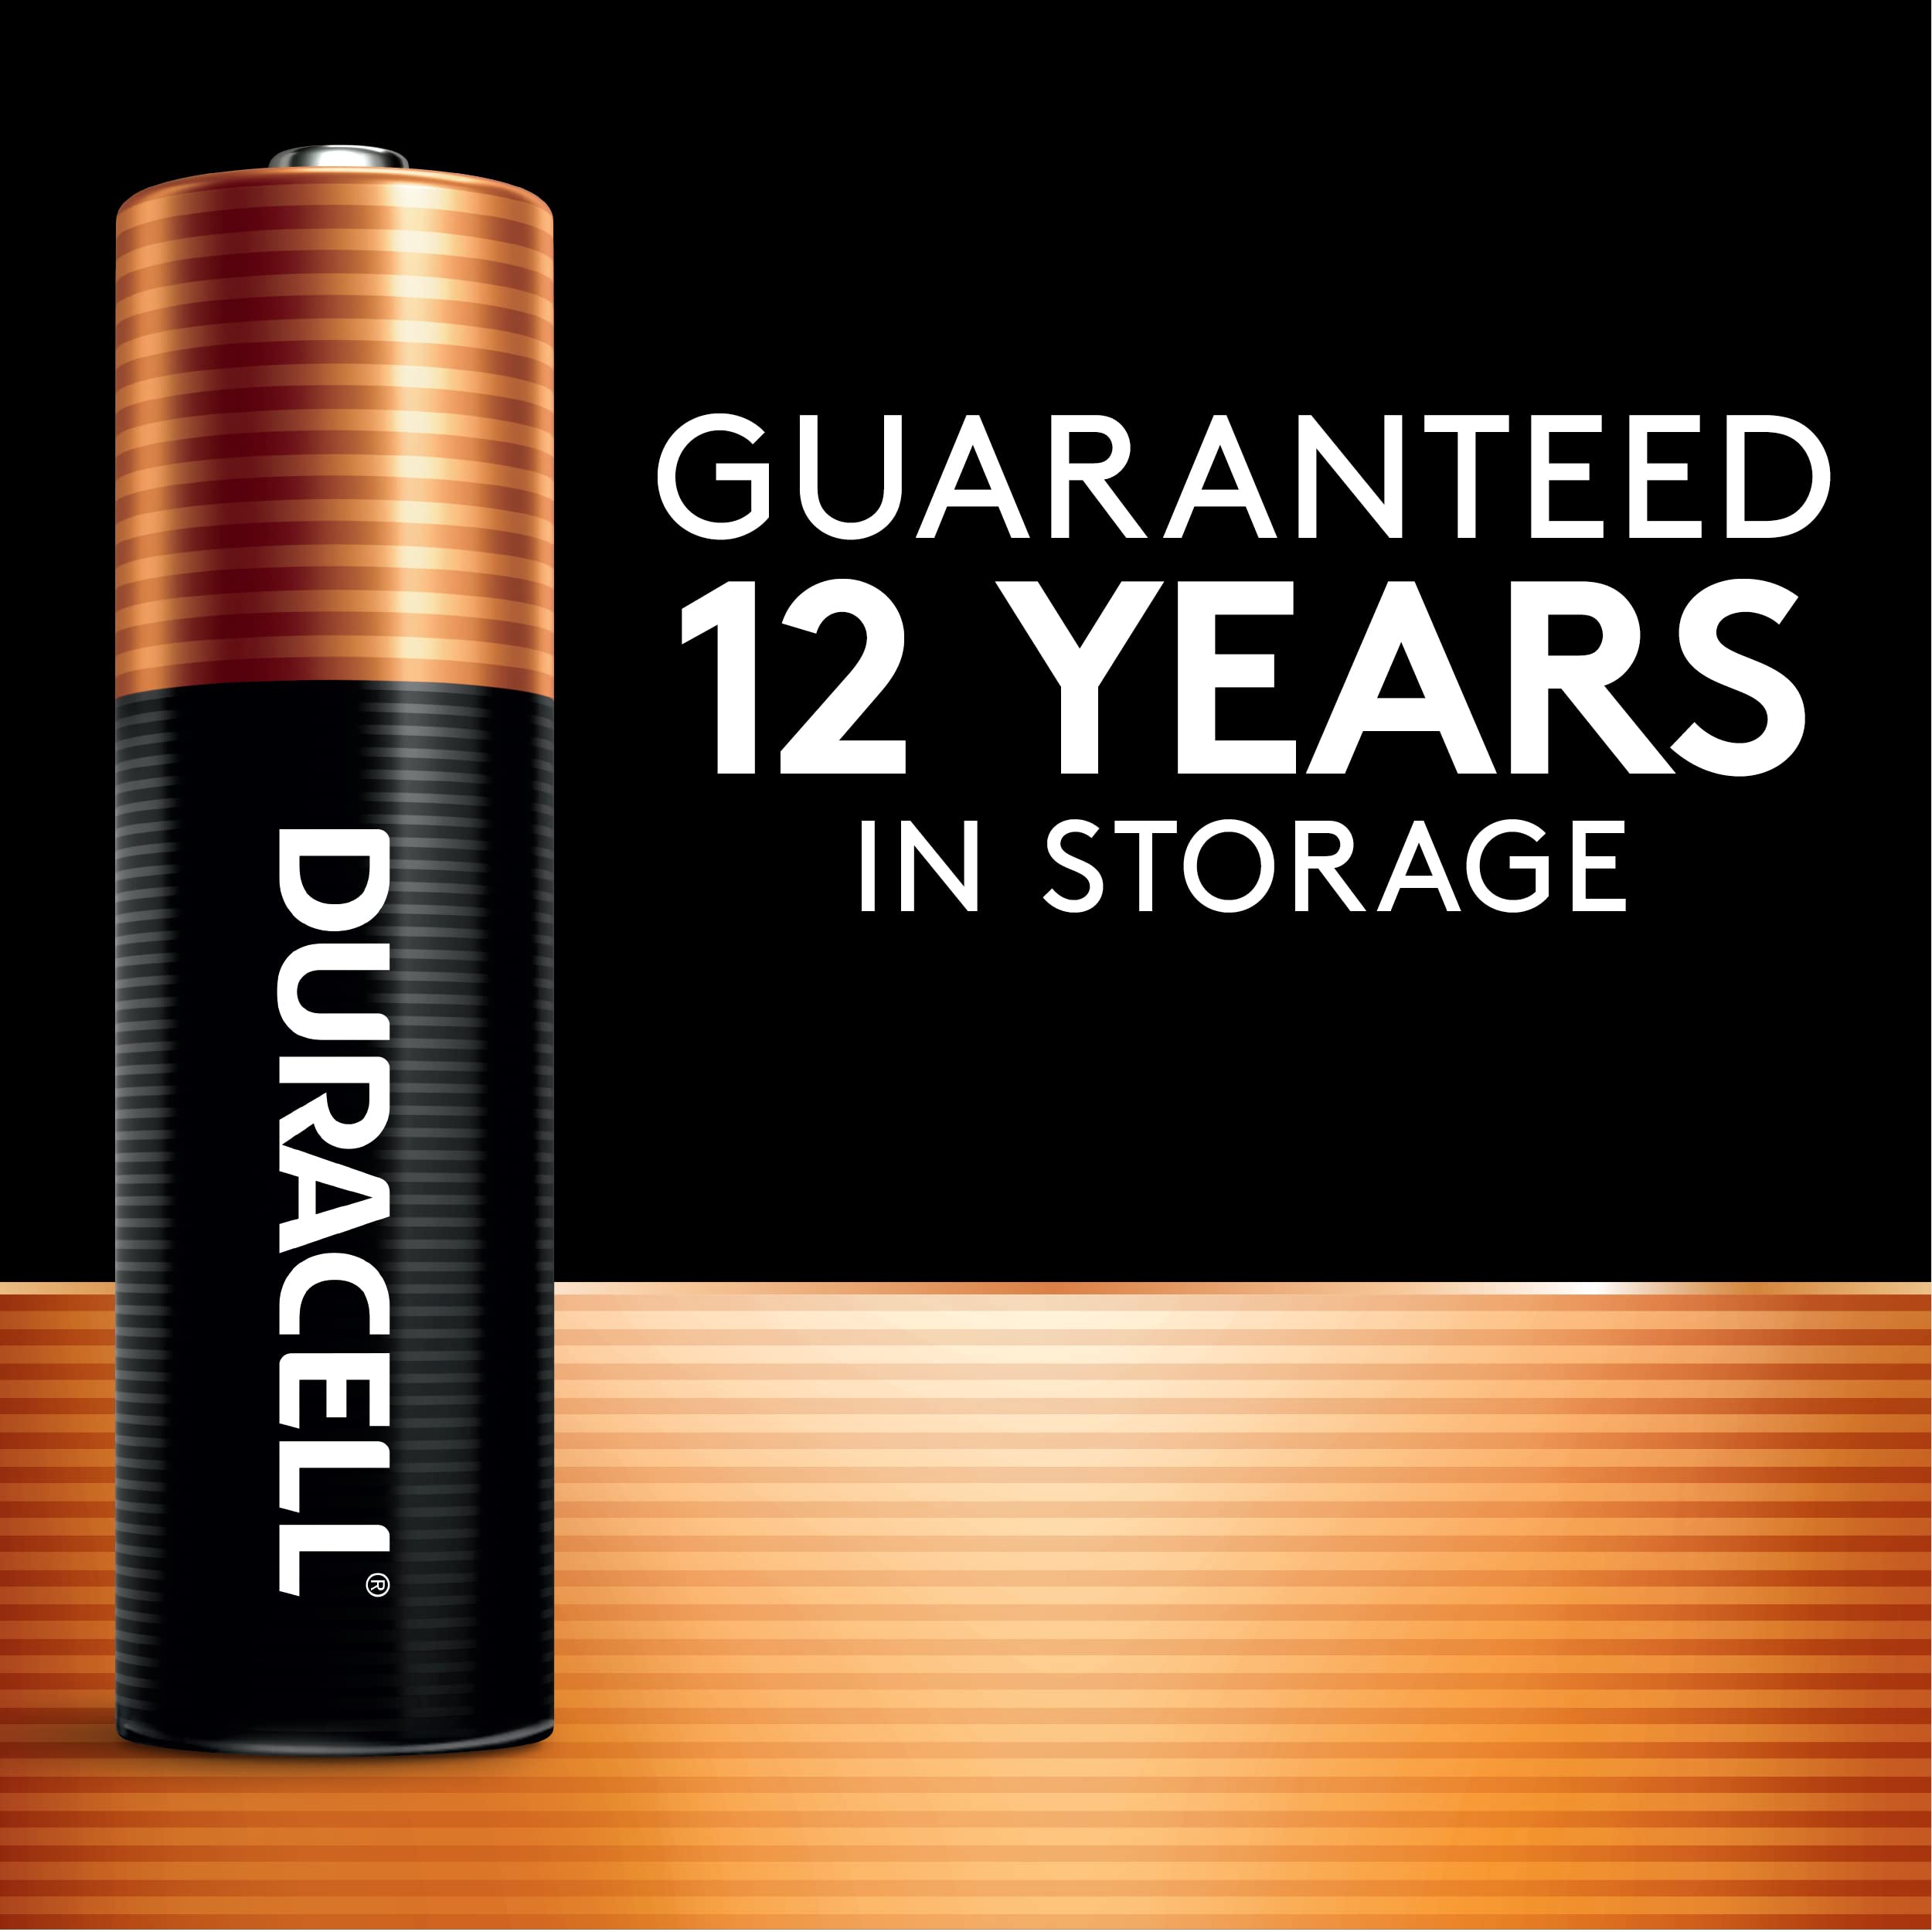 Duracell Coppertop AA Batteries with Power Boost Ingredients, 28 Count Pack Double A Battery with Long-lasting Power, Alkaline AA Battery for Household and Office Devices